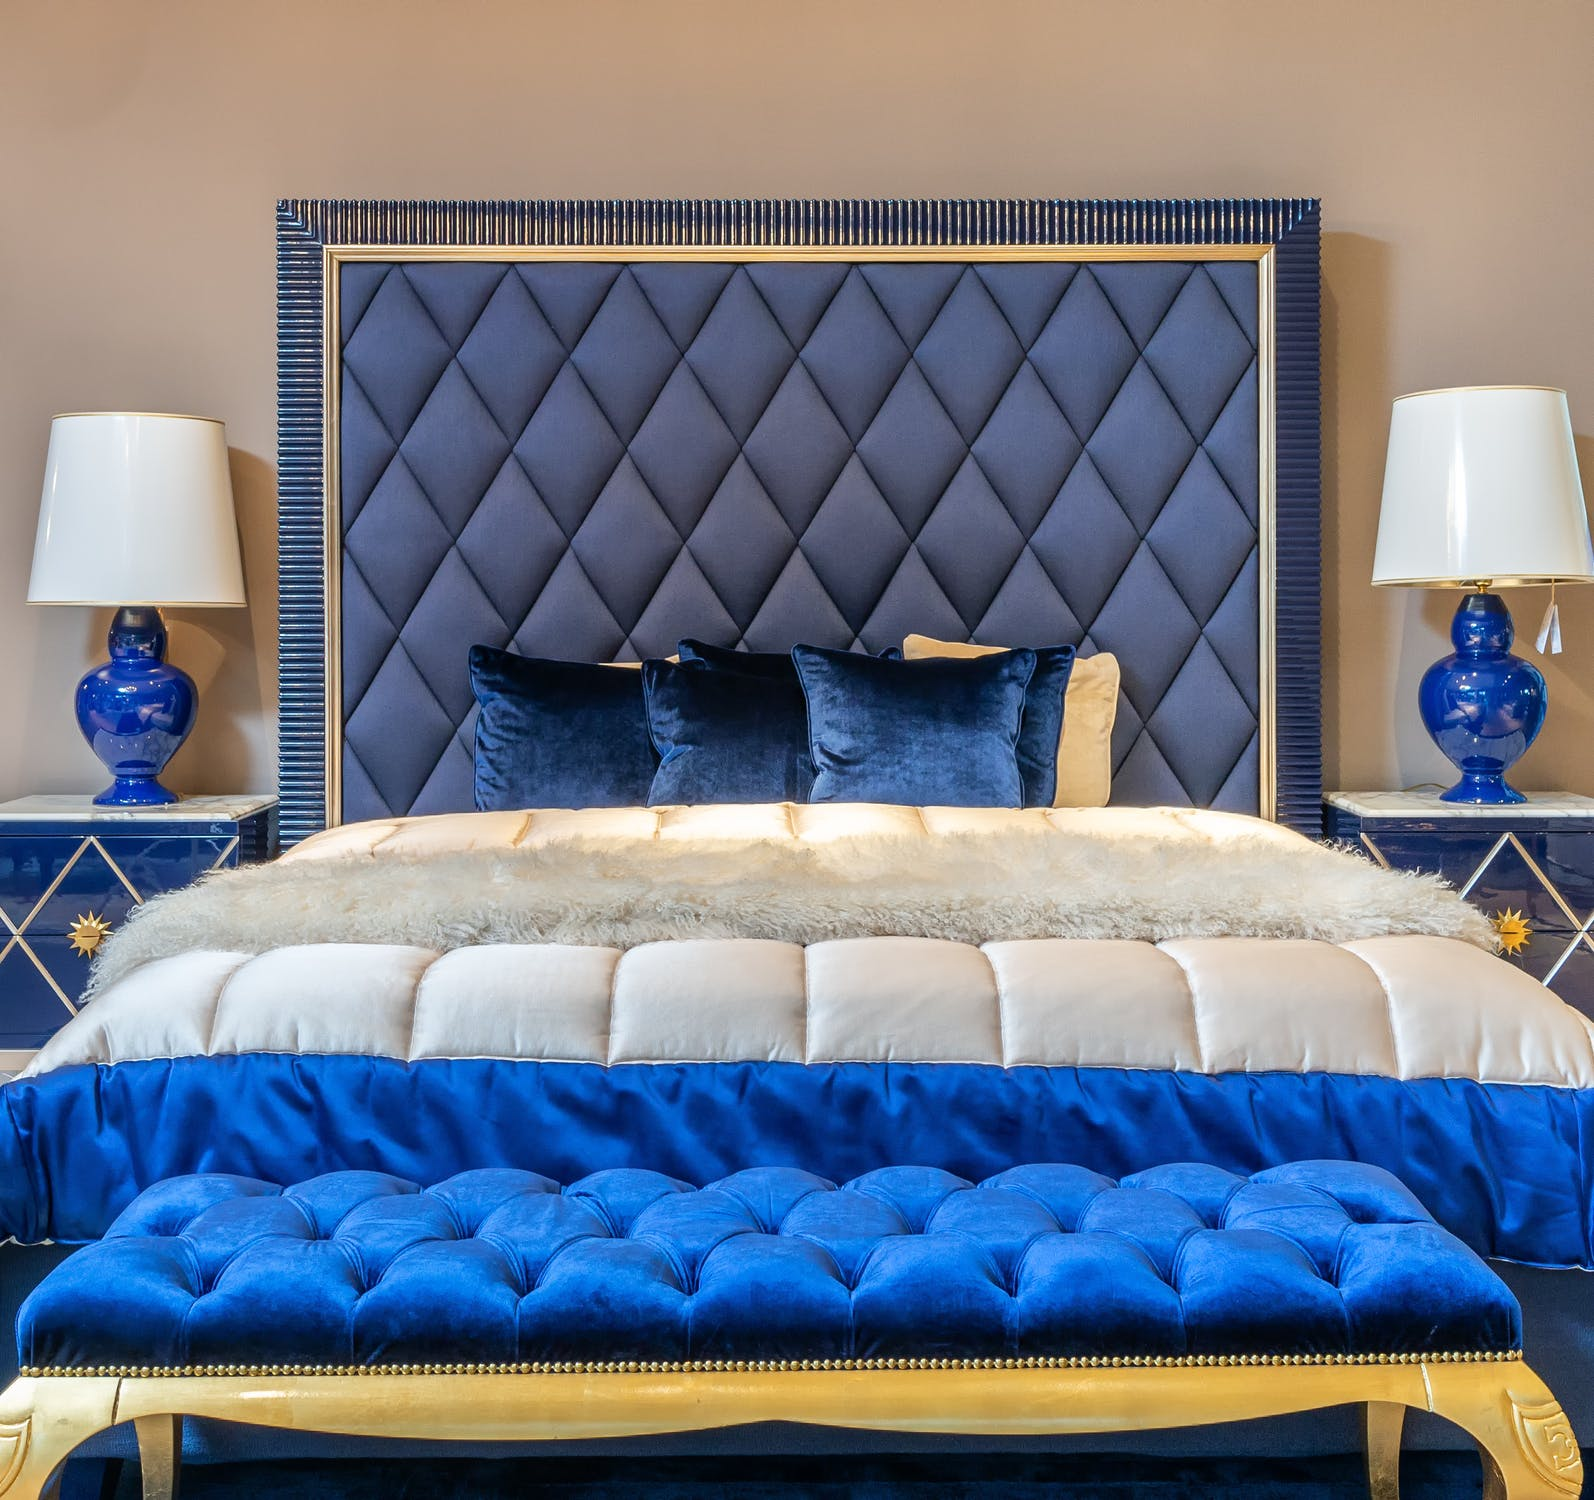 Bedroom with blue decor, MGSD classic interior design style